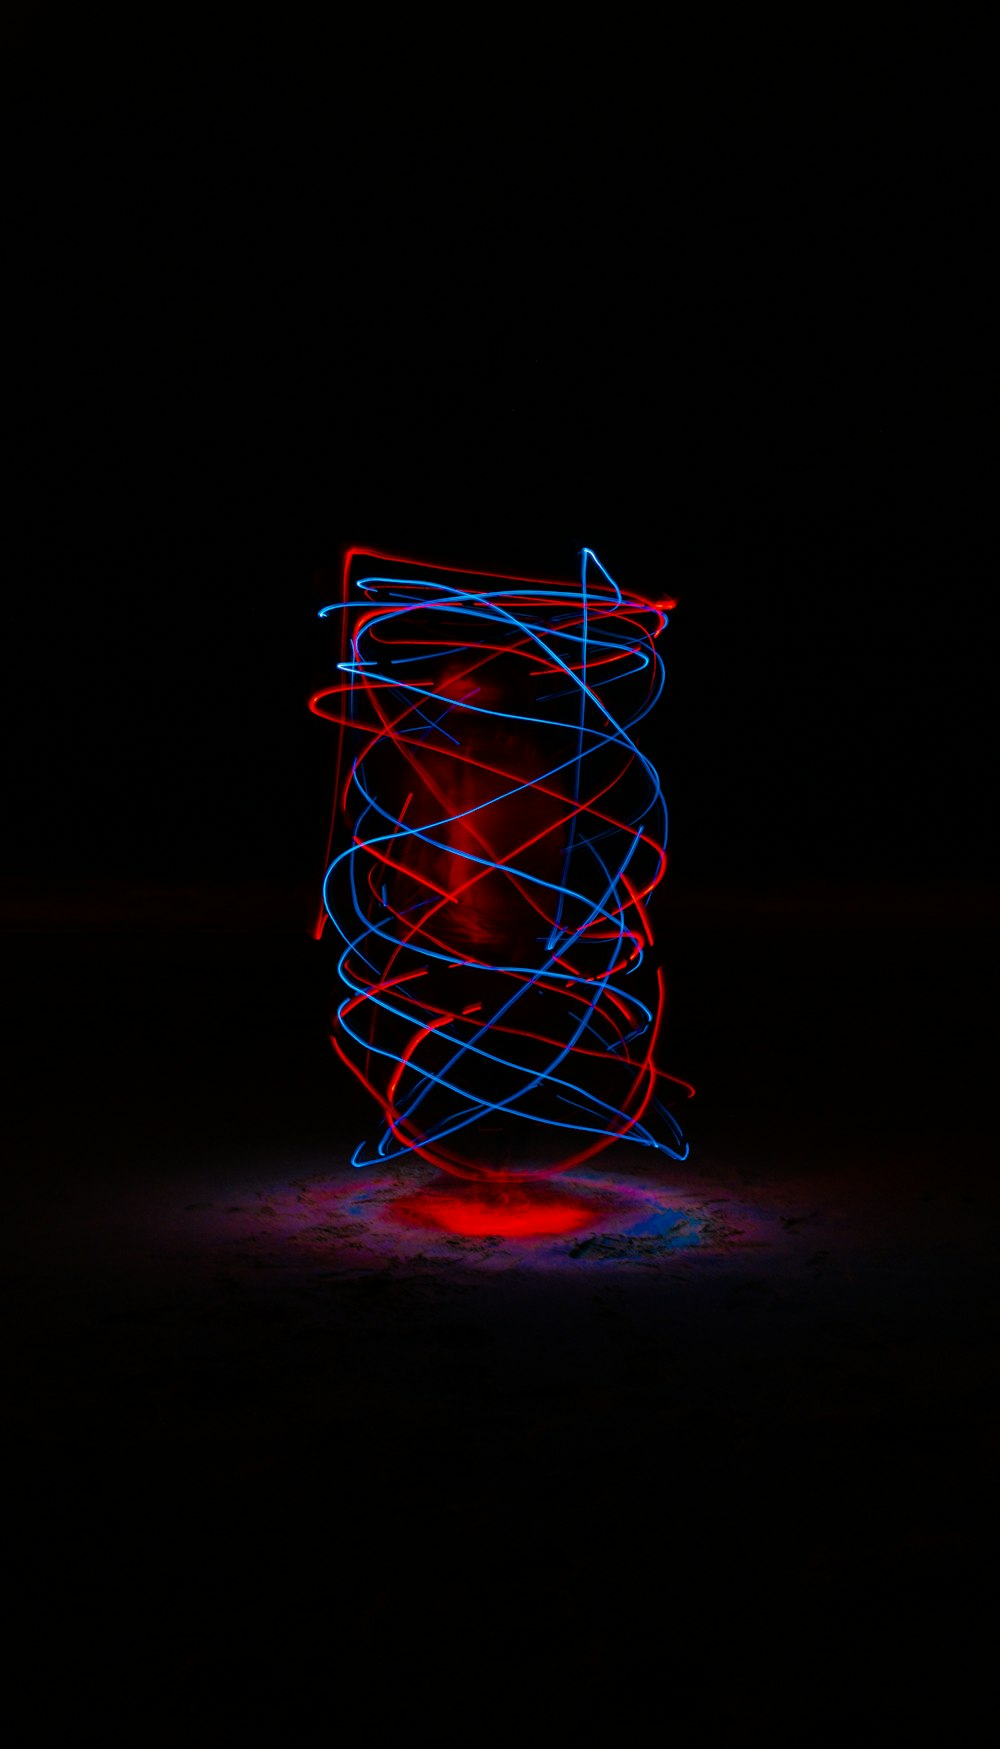 a red, white and blue light painting on a black background